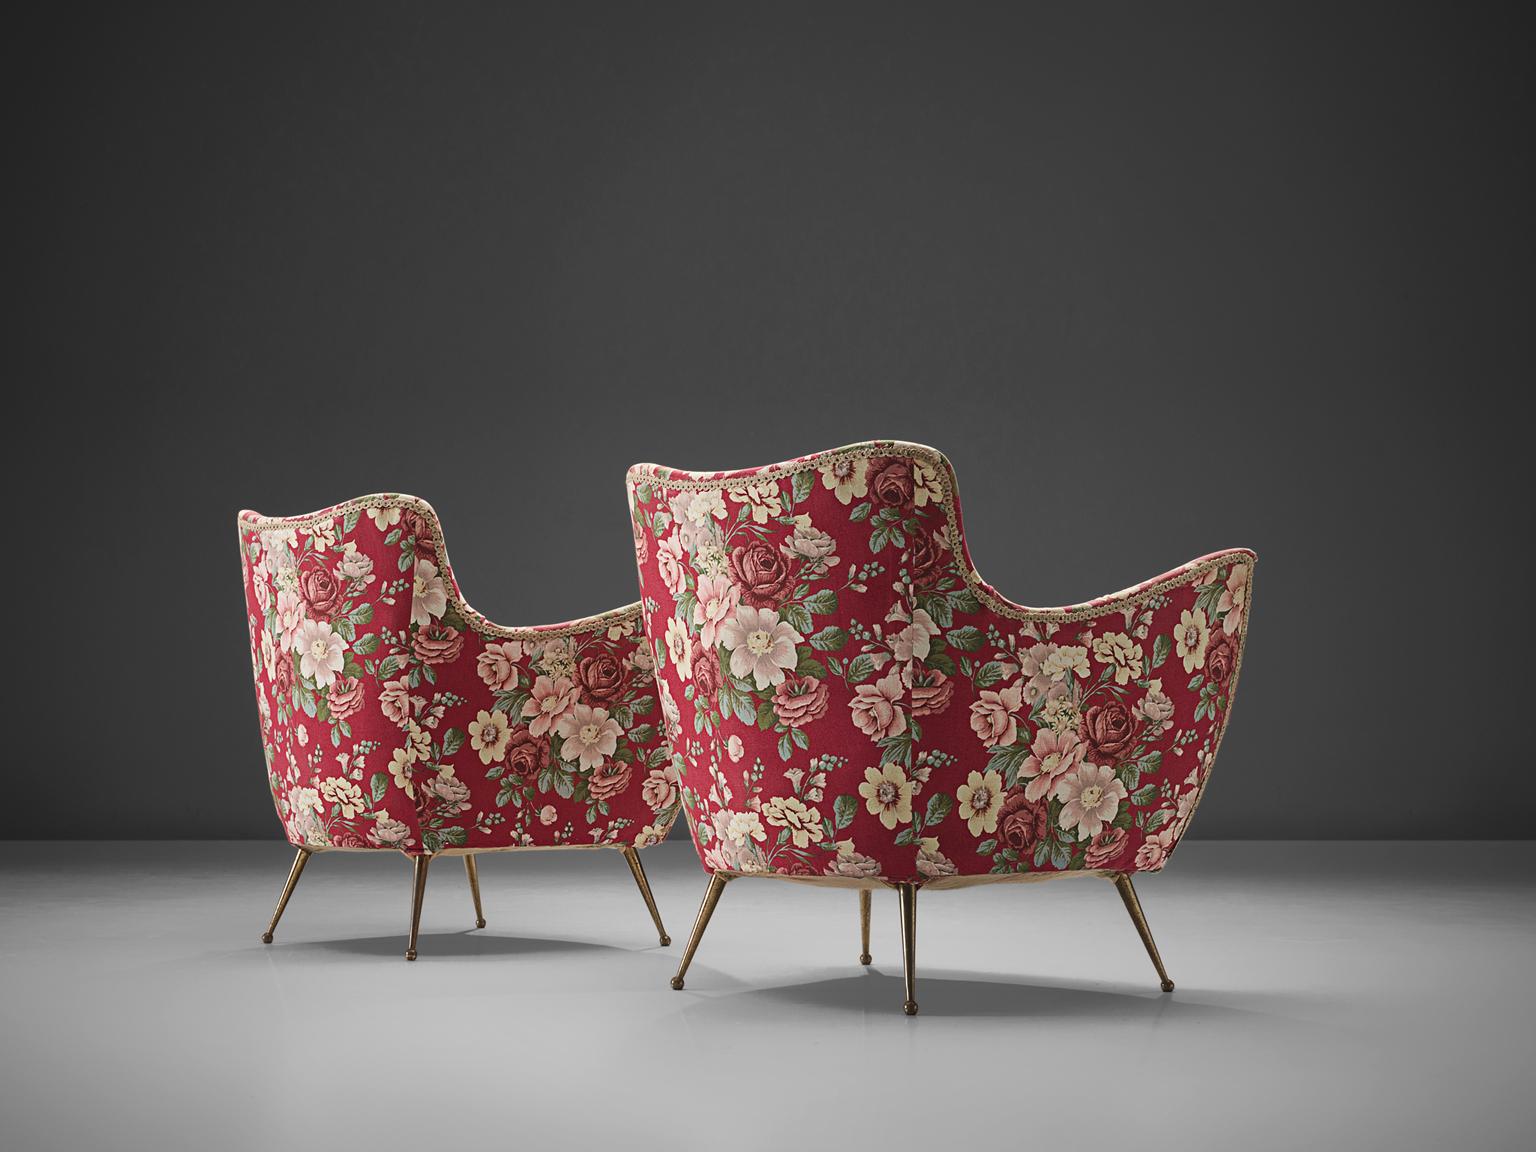 Italian Pair of Lounge Chairs with Red Floral Upholstery by ISA Bergamo